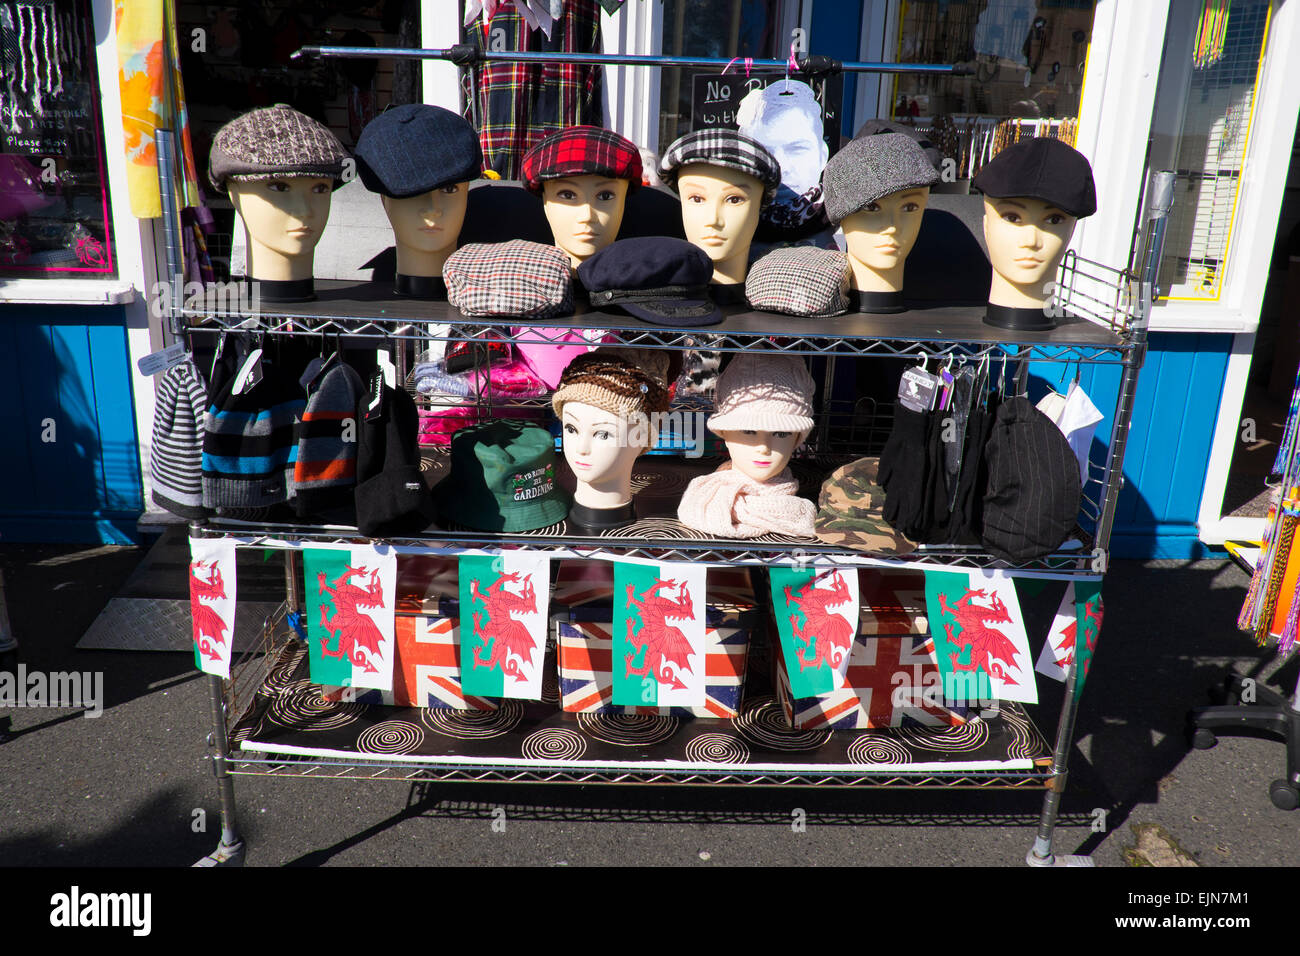 Hats for sale at a shop on Llandudno pier, Conwy, Wales, UK Stock Photo